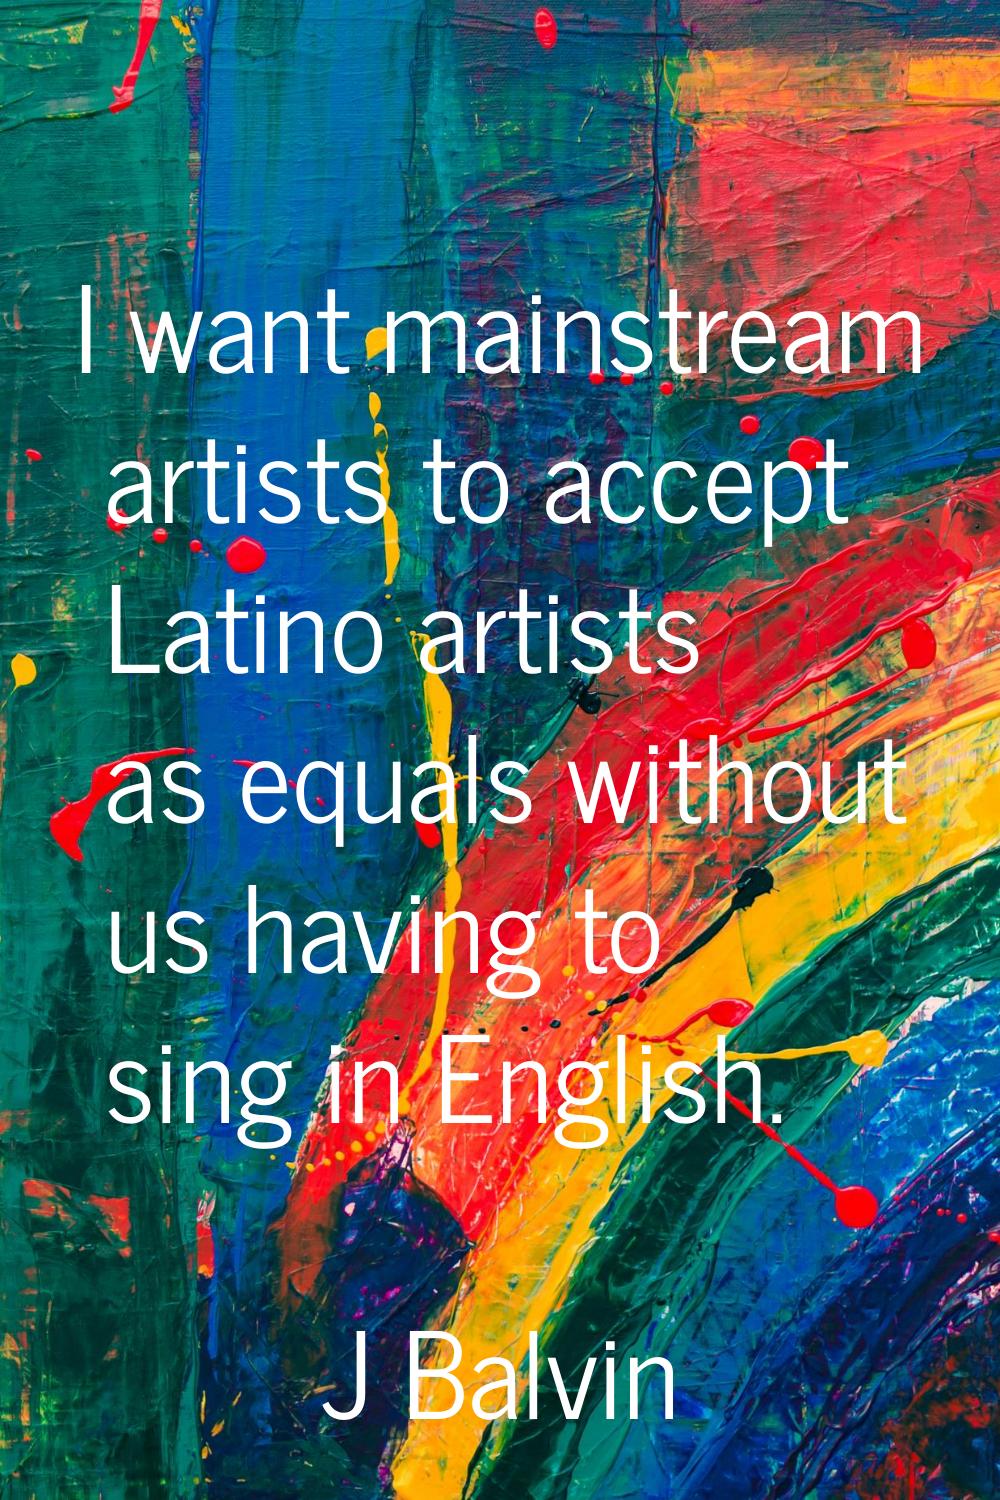 I want mainstream artists to accept Latino artists as equals without us having to sing in English.